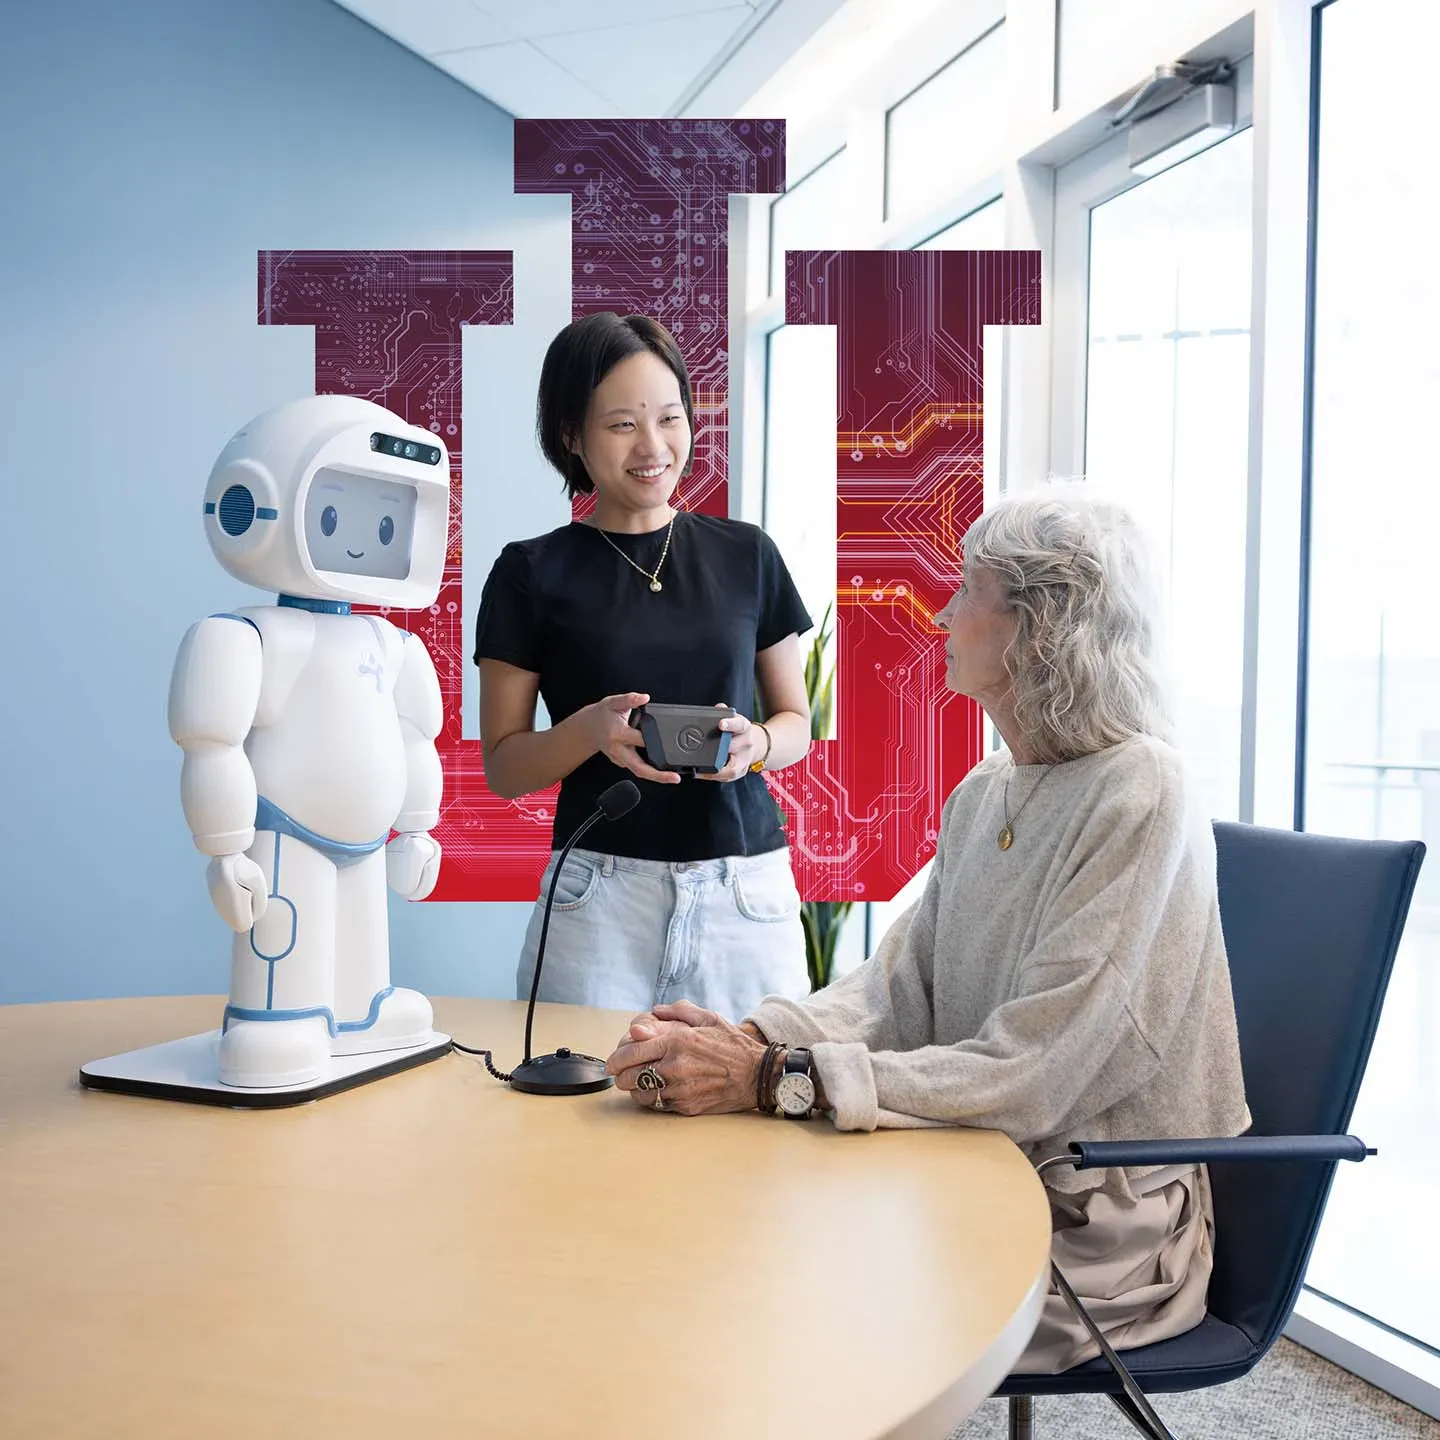 A woman controls a robot as another woman watches, with a large IU trident in the background.